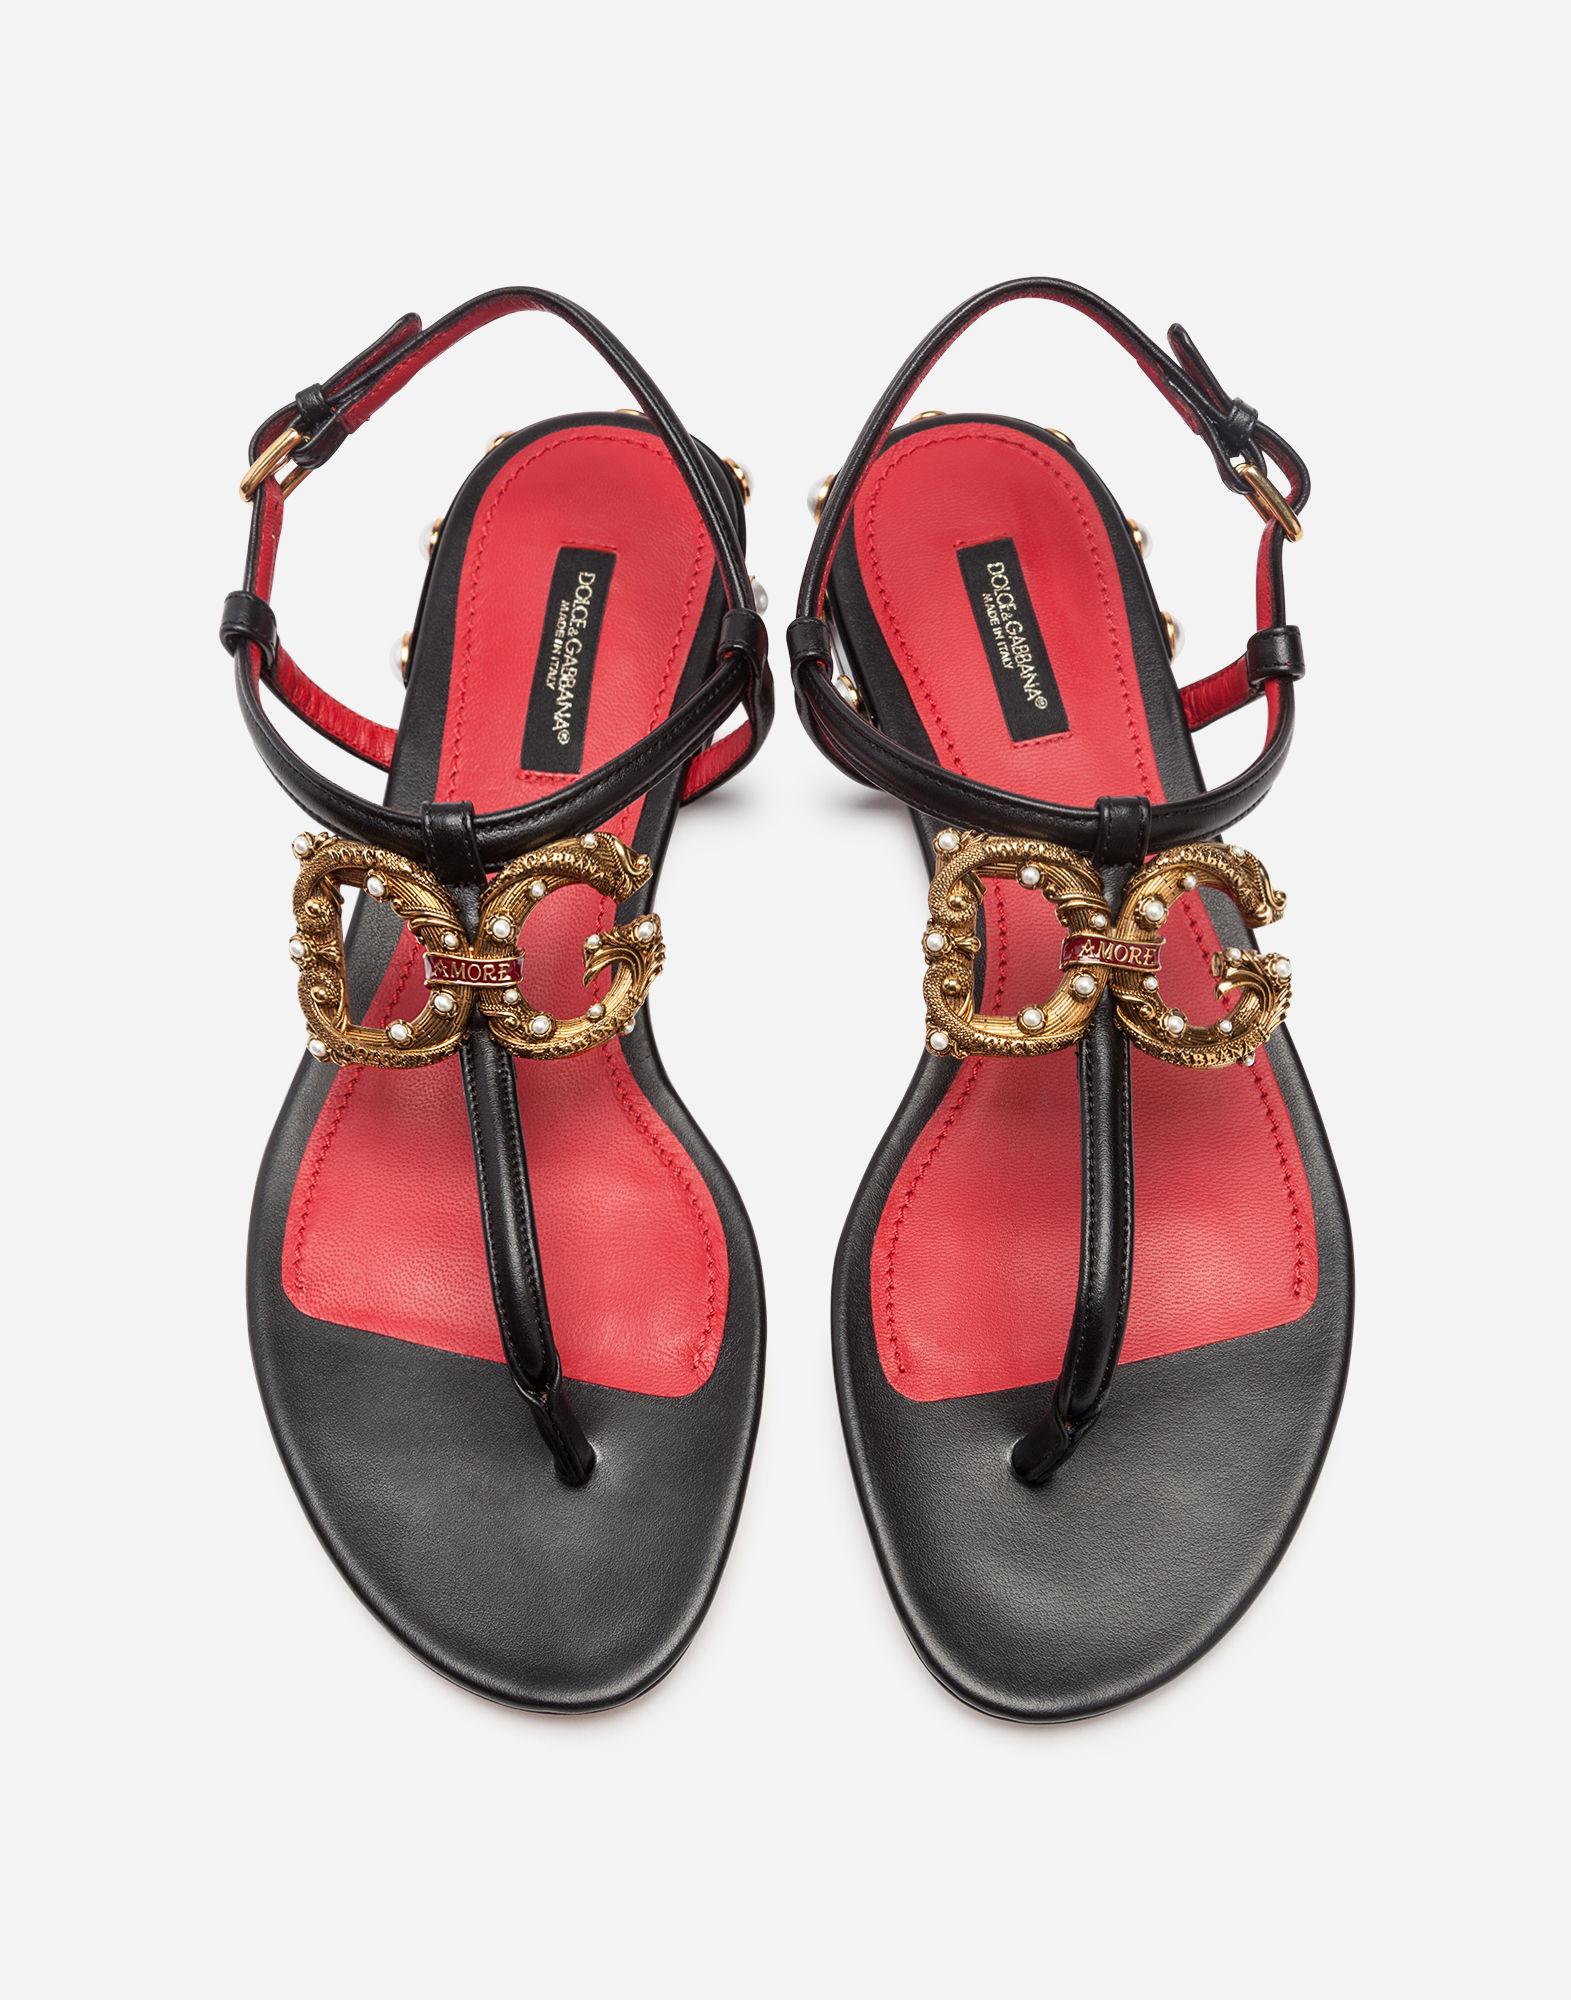 Dolce & Gabbana Leather Dg Amore Thong Sandals In Calfskin in Black - Lyst